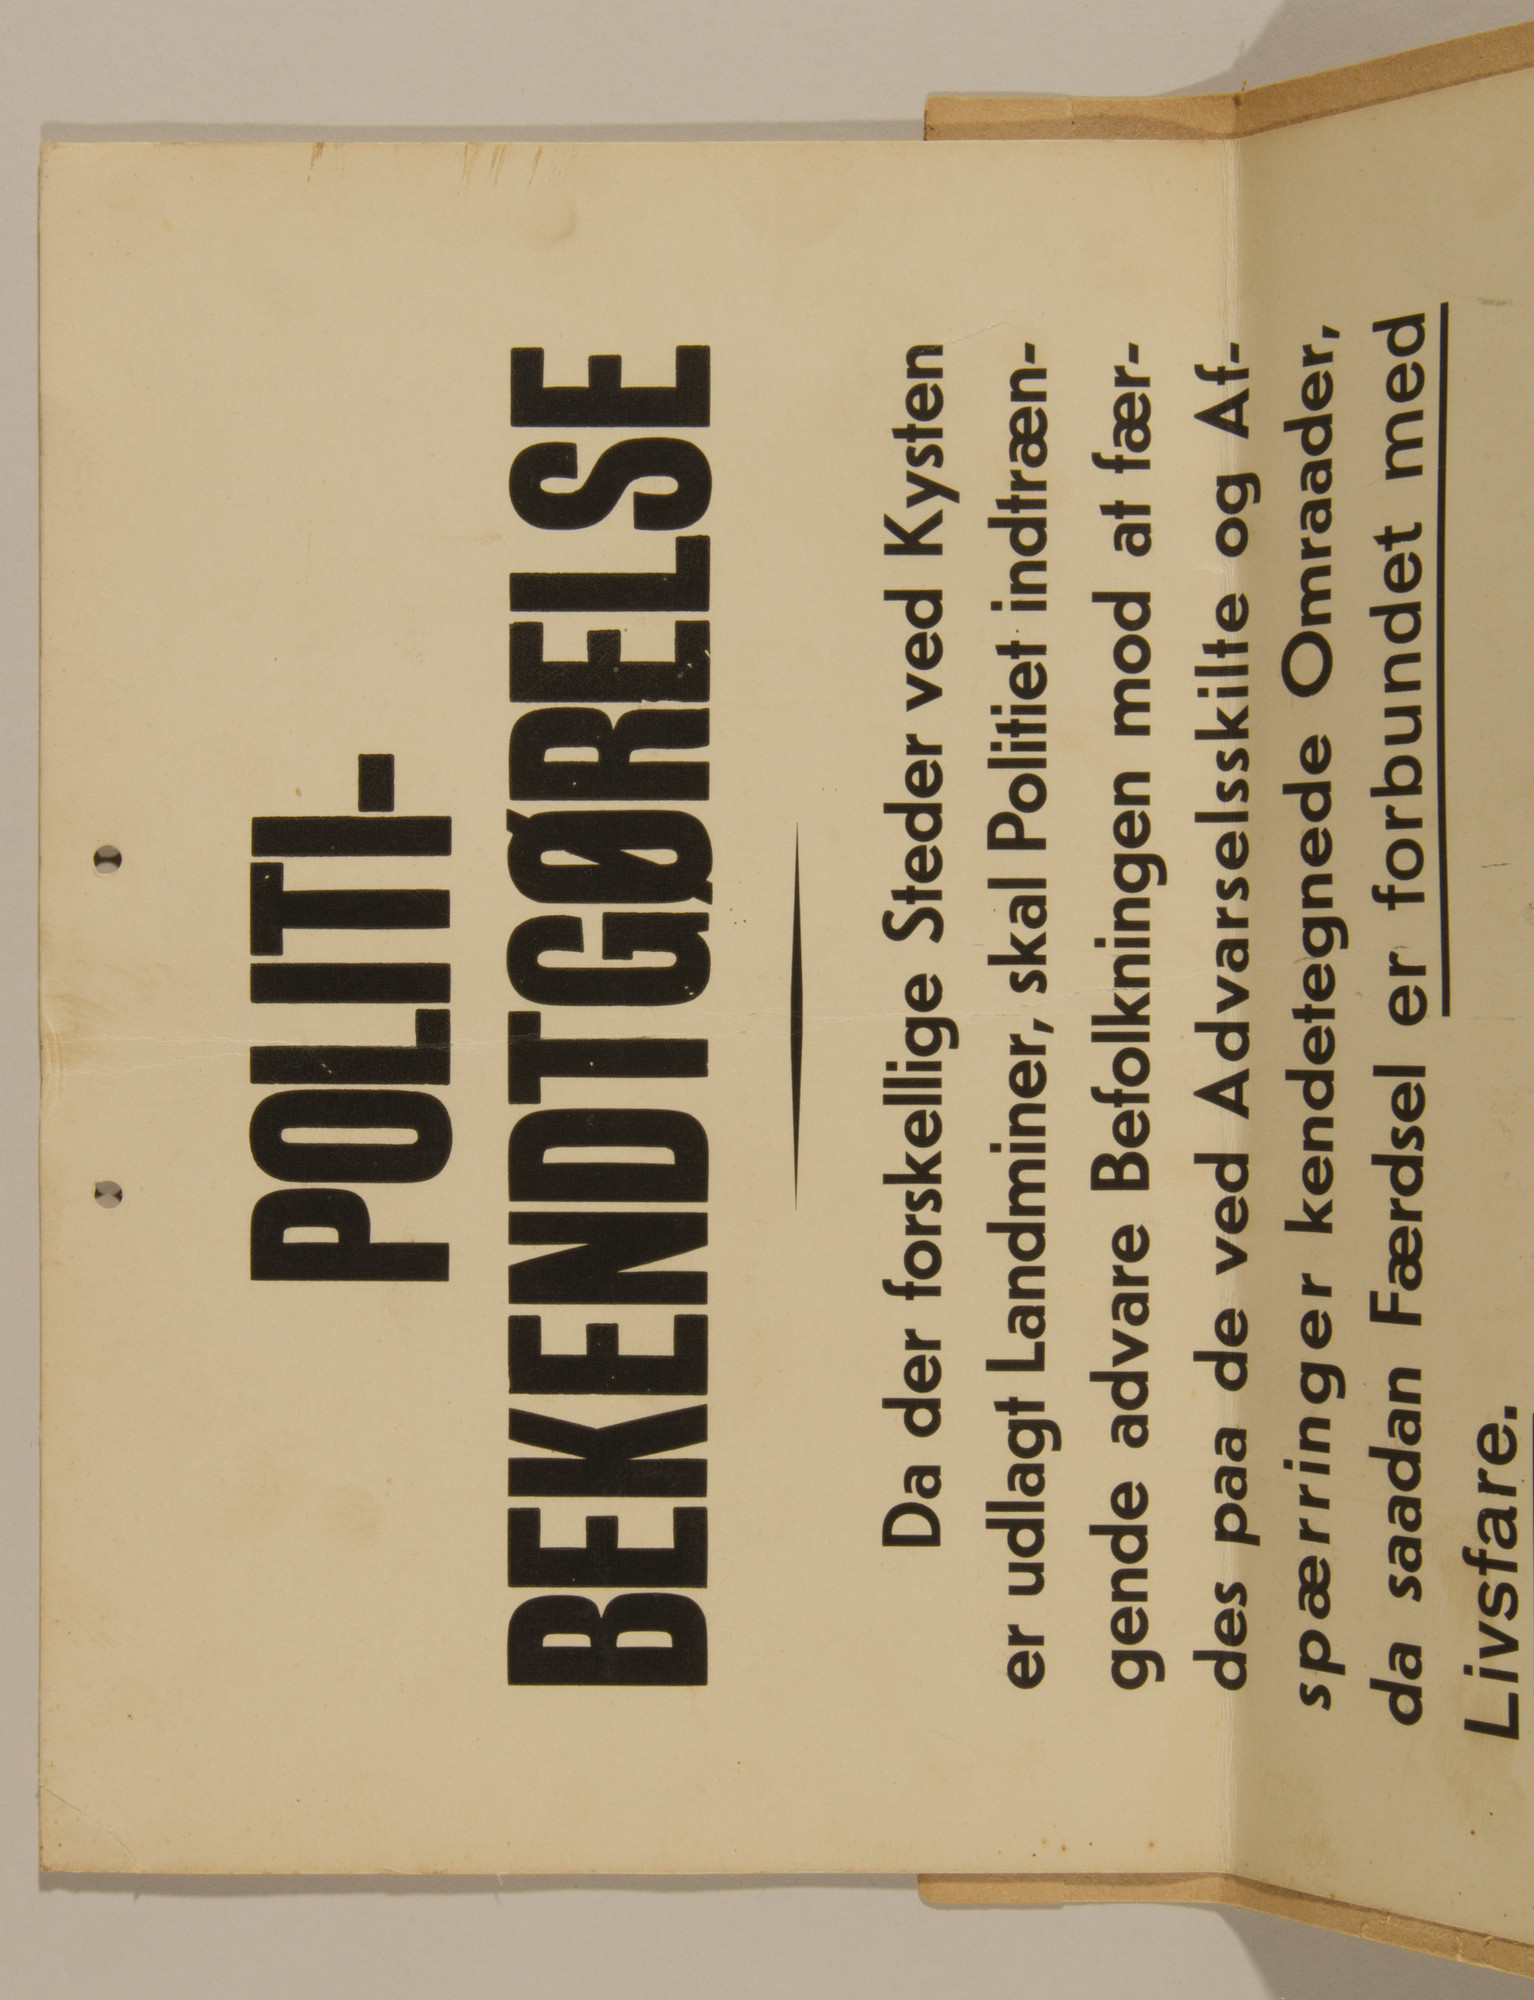 Page from volume four of a set of scrapbooks compiled by Bjorn Sibbern, a Danish policeman and resistance member, documenting the German occupation of Denmark.

This page contains a police bulletin.